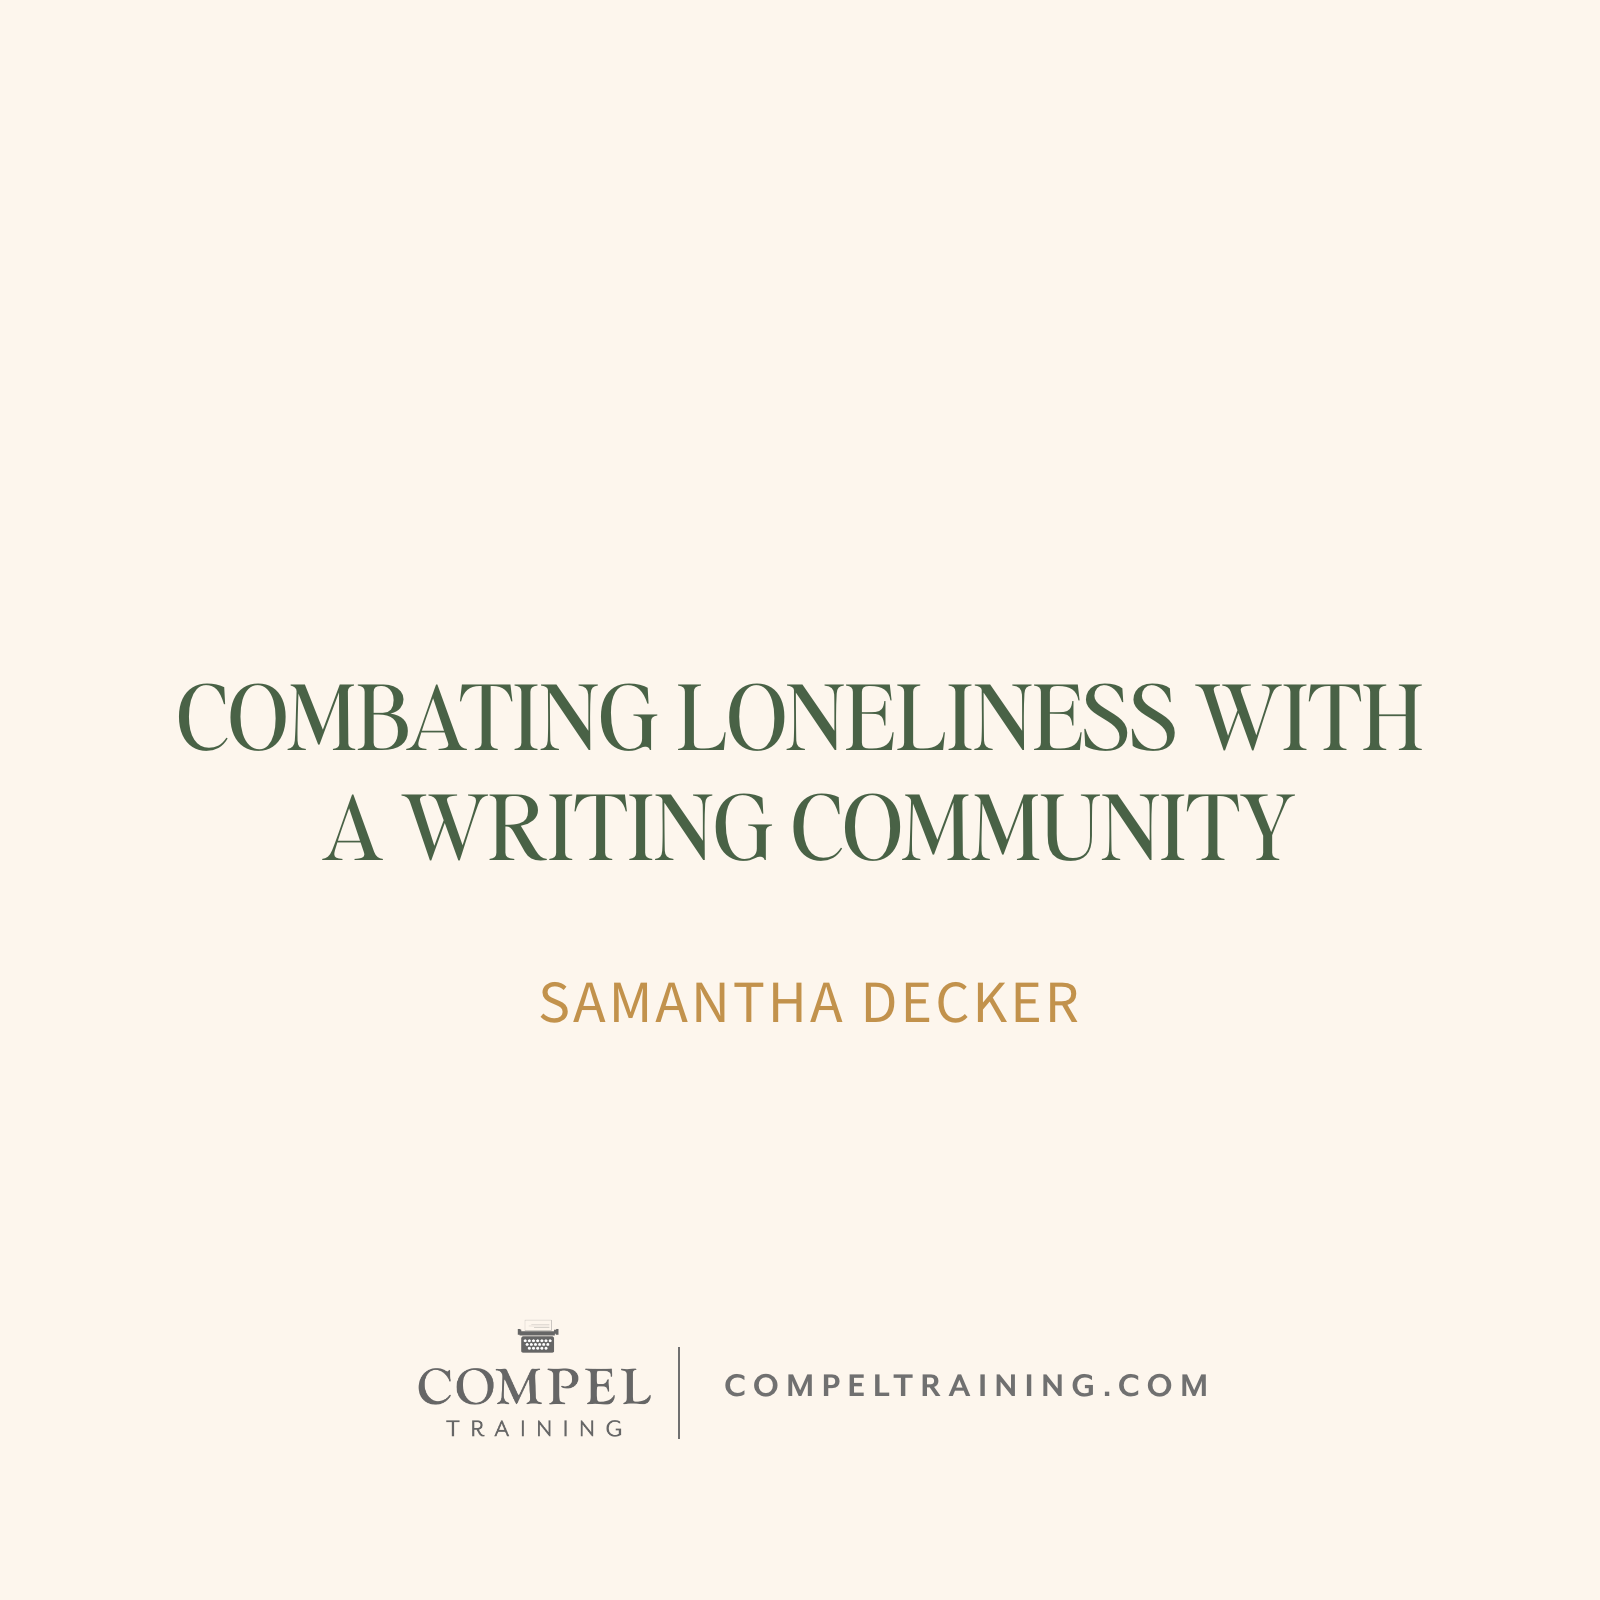 Being a writer can oftentimes feel like we’re living on a deserted island. The act of writing is generally something we do alone, after all. But there’s amazing news! We don’t have to navigate this writing world all by ourselves. Read more to glean three benefits of finding community in your writing journey.